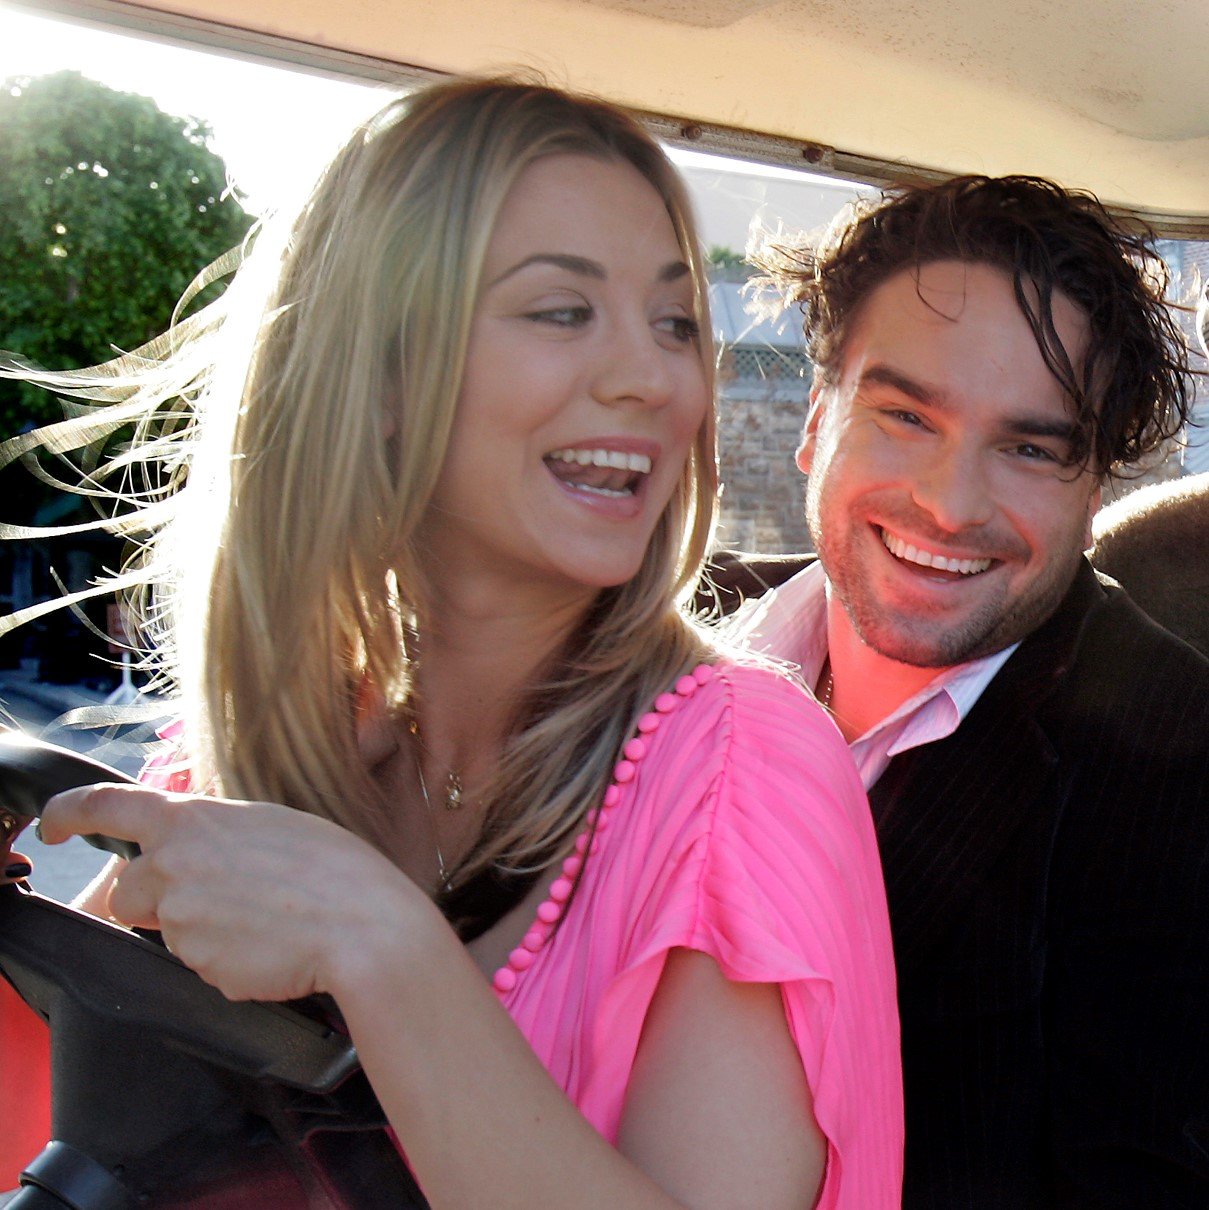  Kaley Cuoco and Johnny Galecki in Burbank, California in 2009. | Source: Getty Images